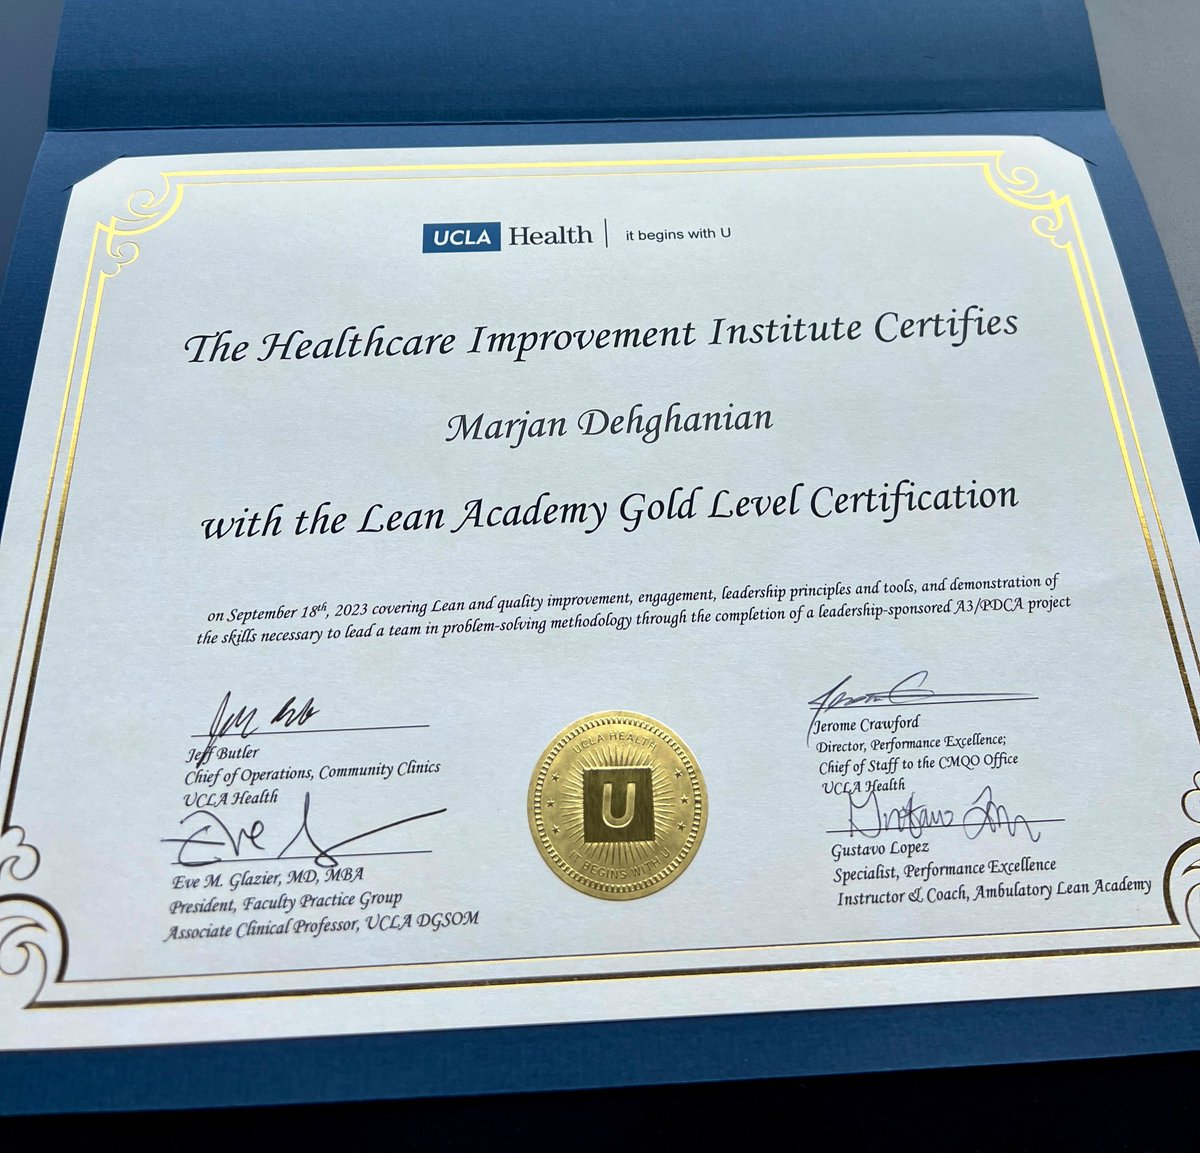 I am so grateful be a part of #UCLA Lean Academy and to have the opportunity to learn from such superb leaders. Our recent project on #ContinuityOfCare was incredibly important and highlights the critical role that primary care plays in our healthcare system.